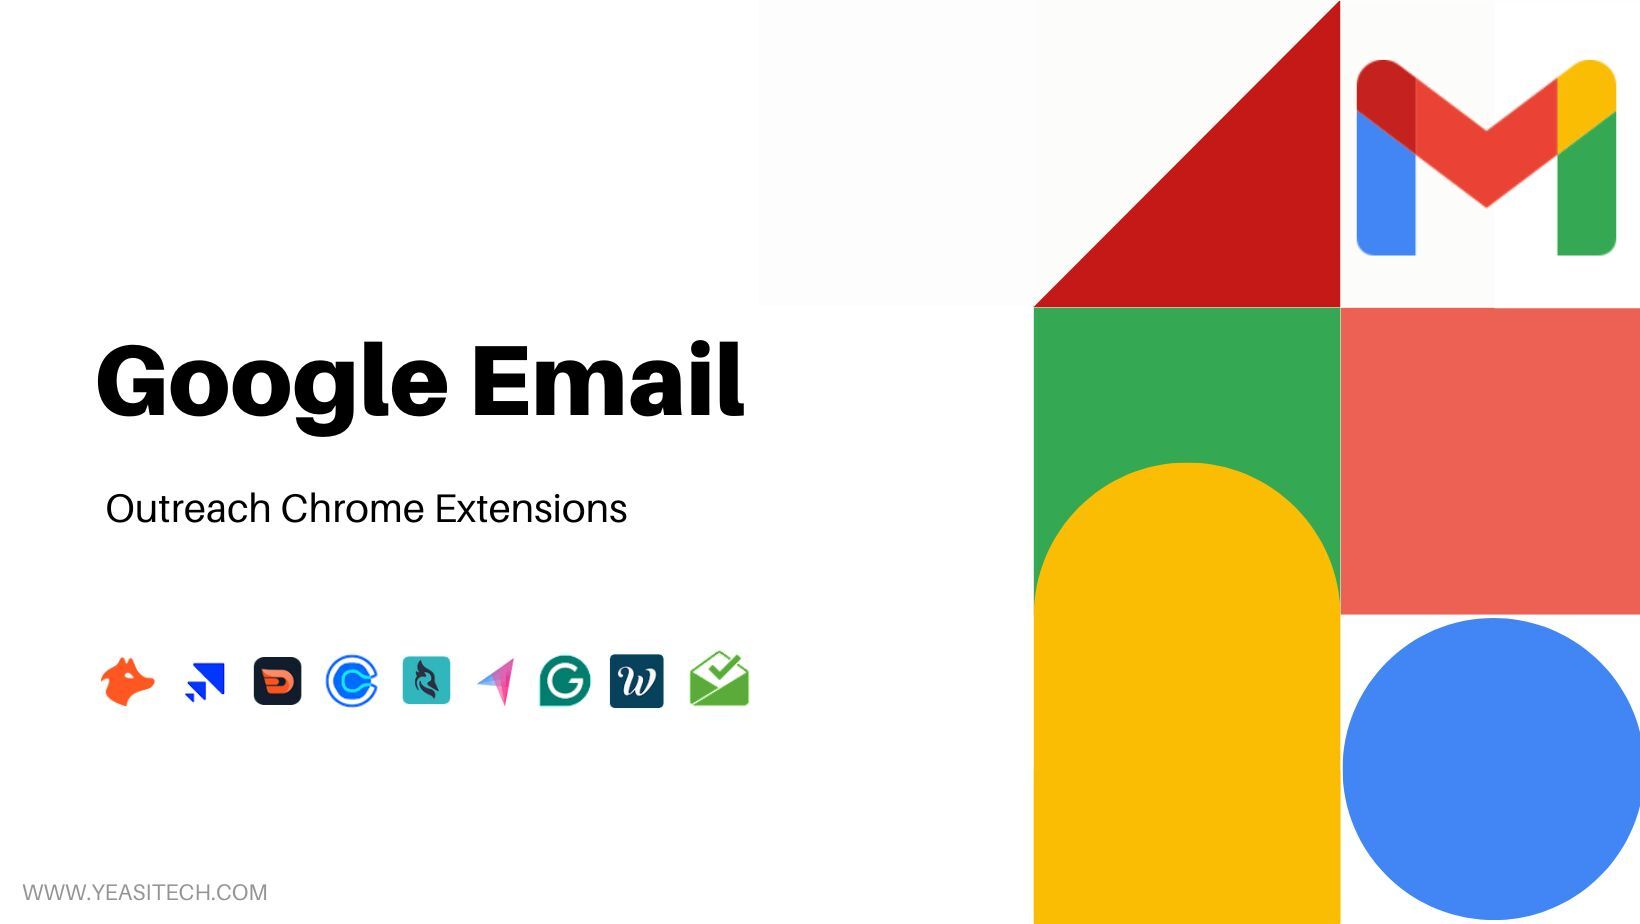 Google Email Outreach Chrome Extensions